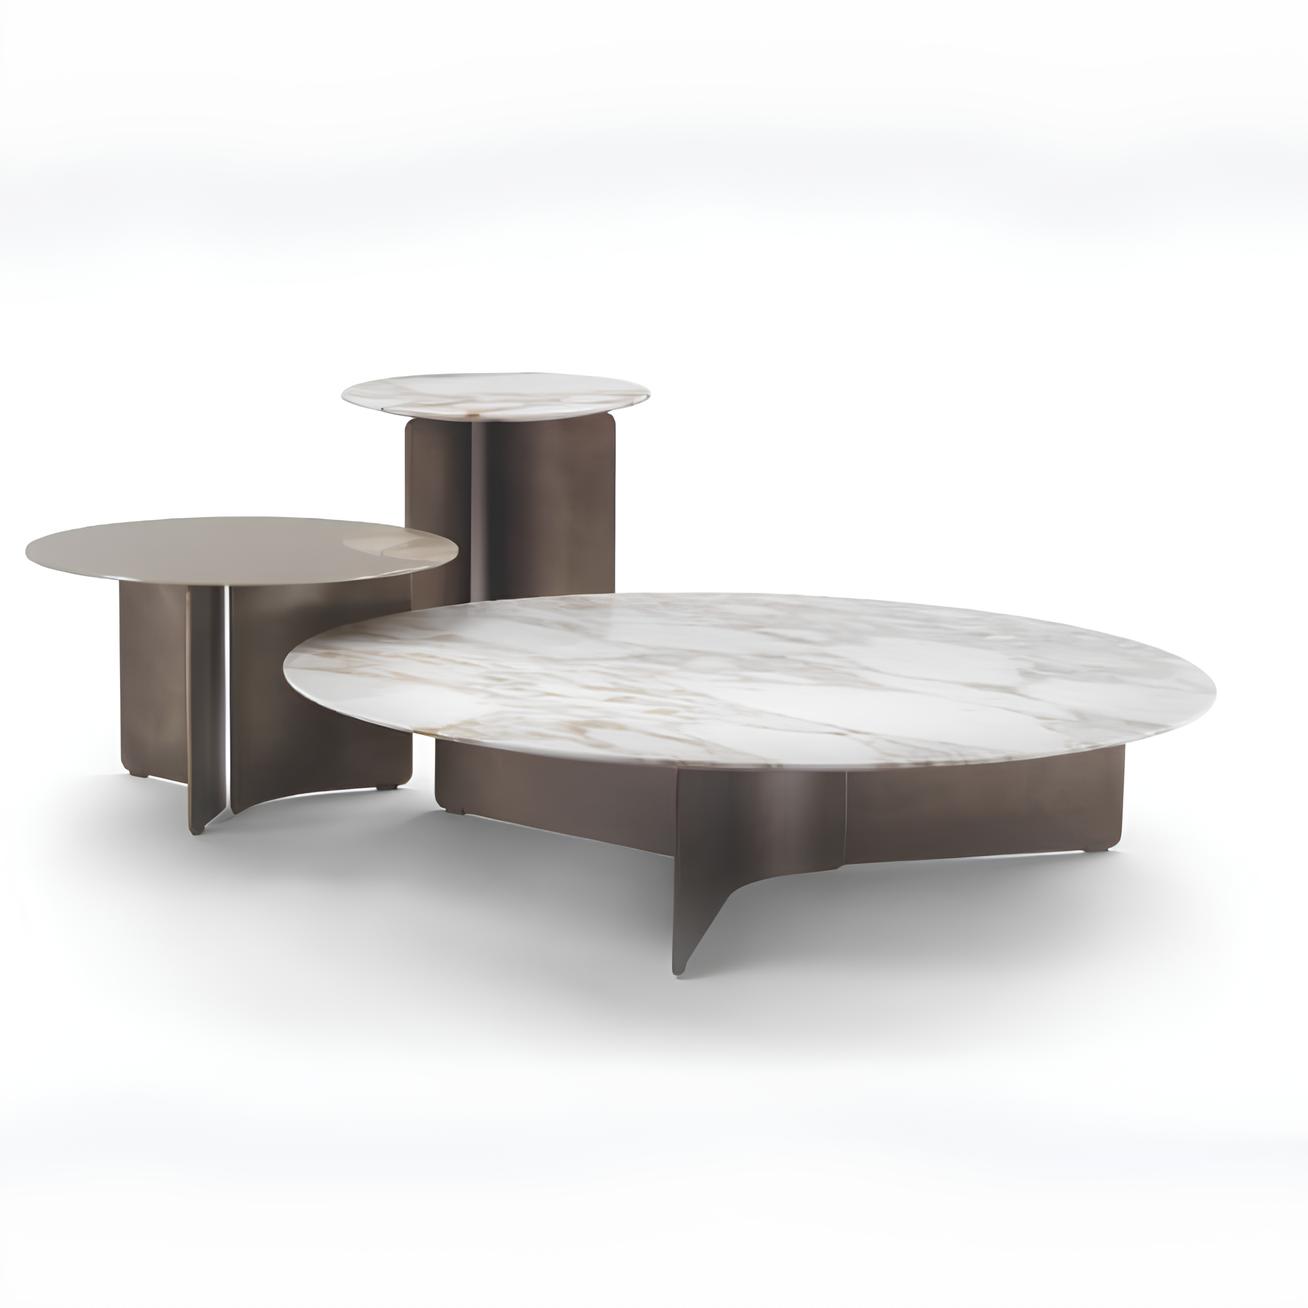 Set of tree coffee tables with white marble top